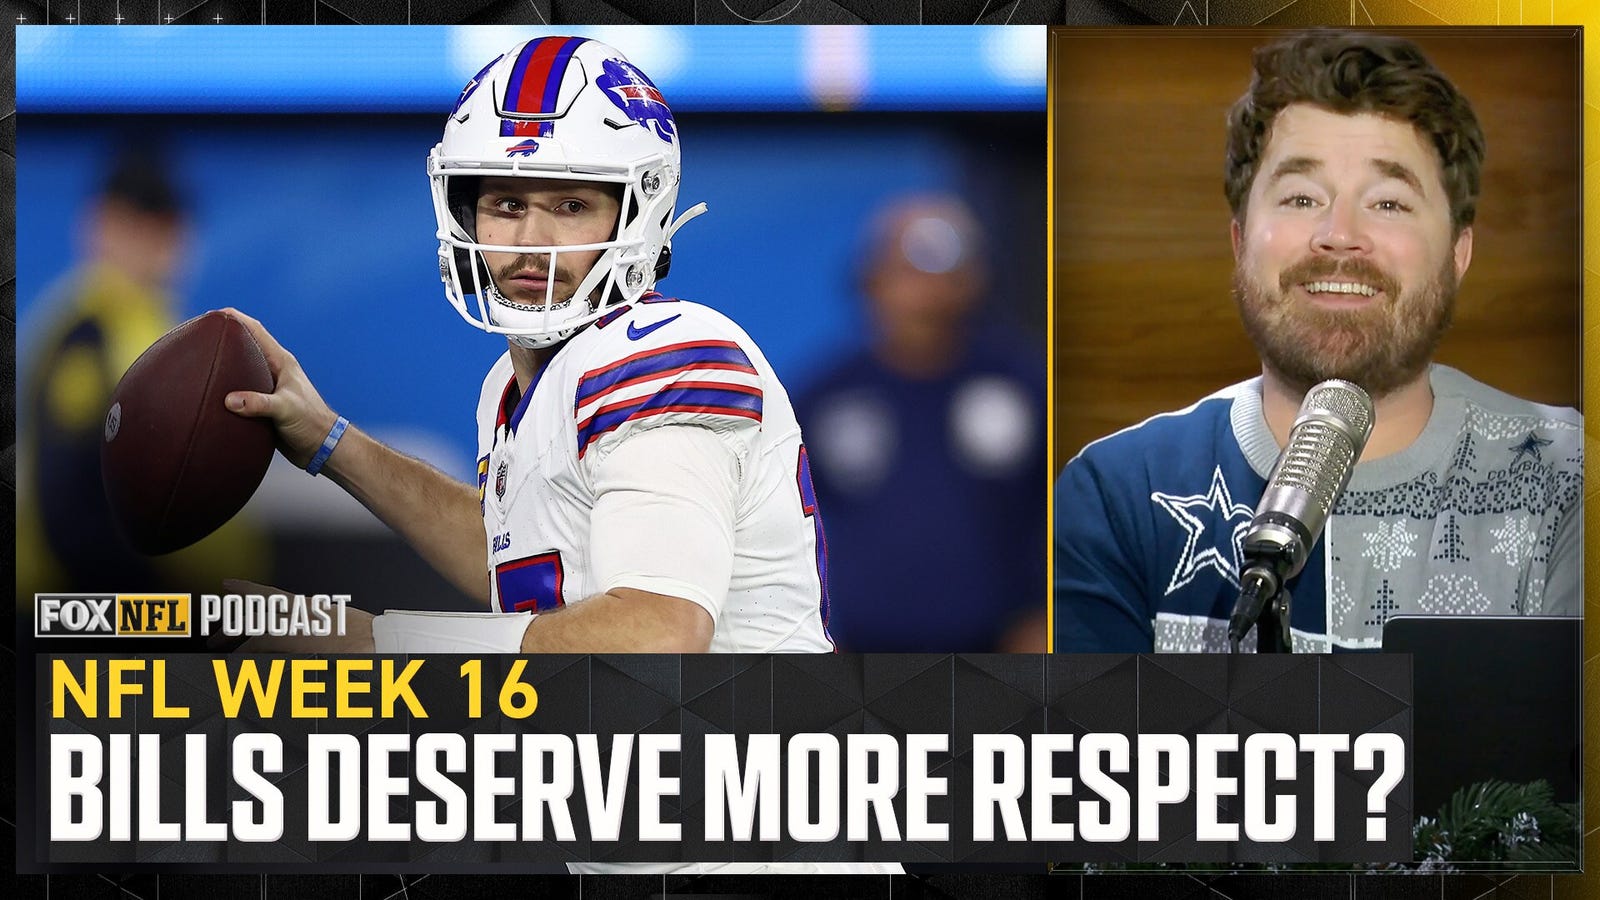 Does Josh Allen, Buffalo Bills, deserve more RESPECT after the sustained win against the Chargers?